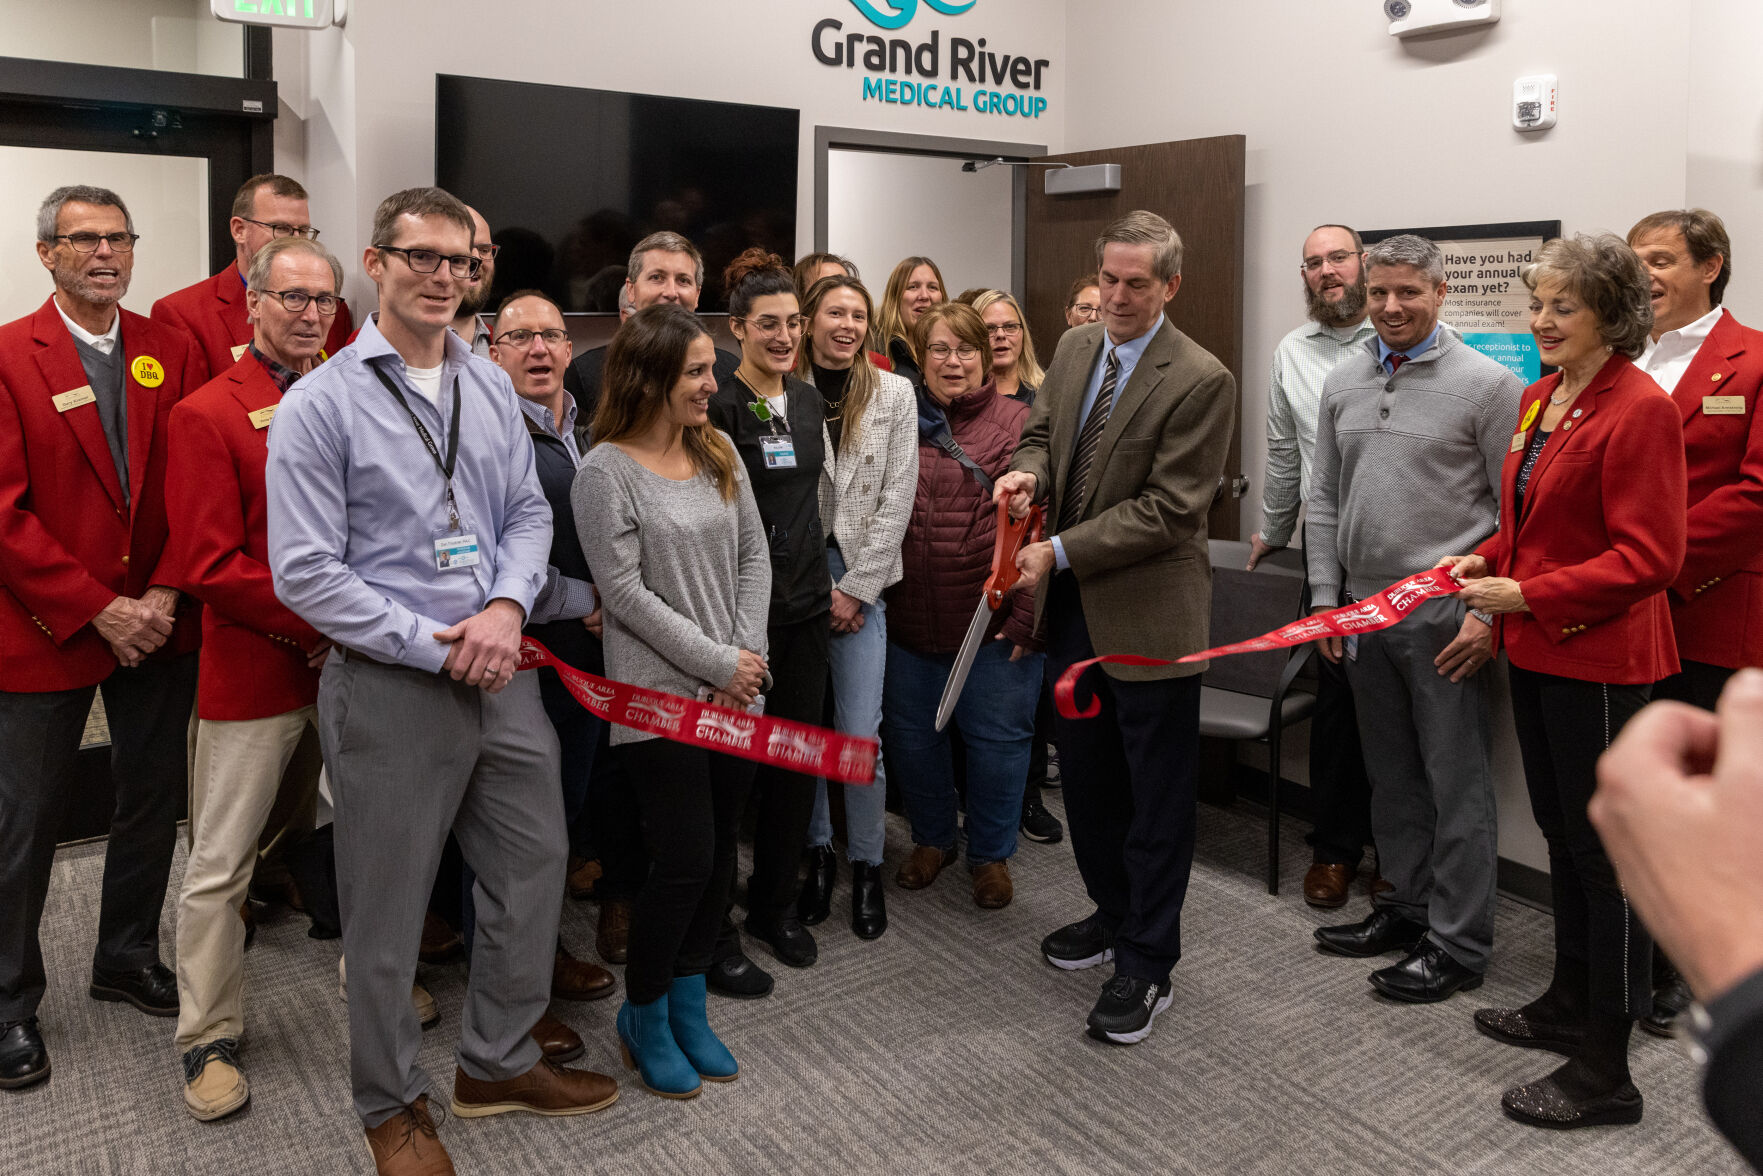 Grand River Medical Group, 245 Railroad Ave., Suite F-1, Dubuque.    PHOTO CREDIT: Dubuque Area Chamber of Commerce